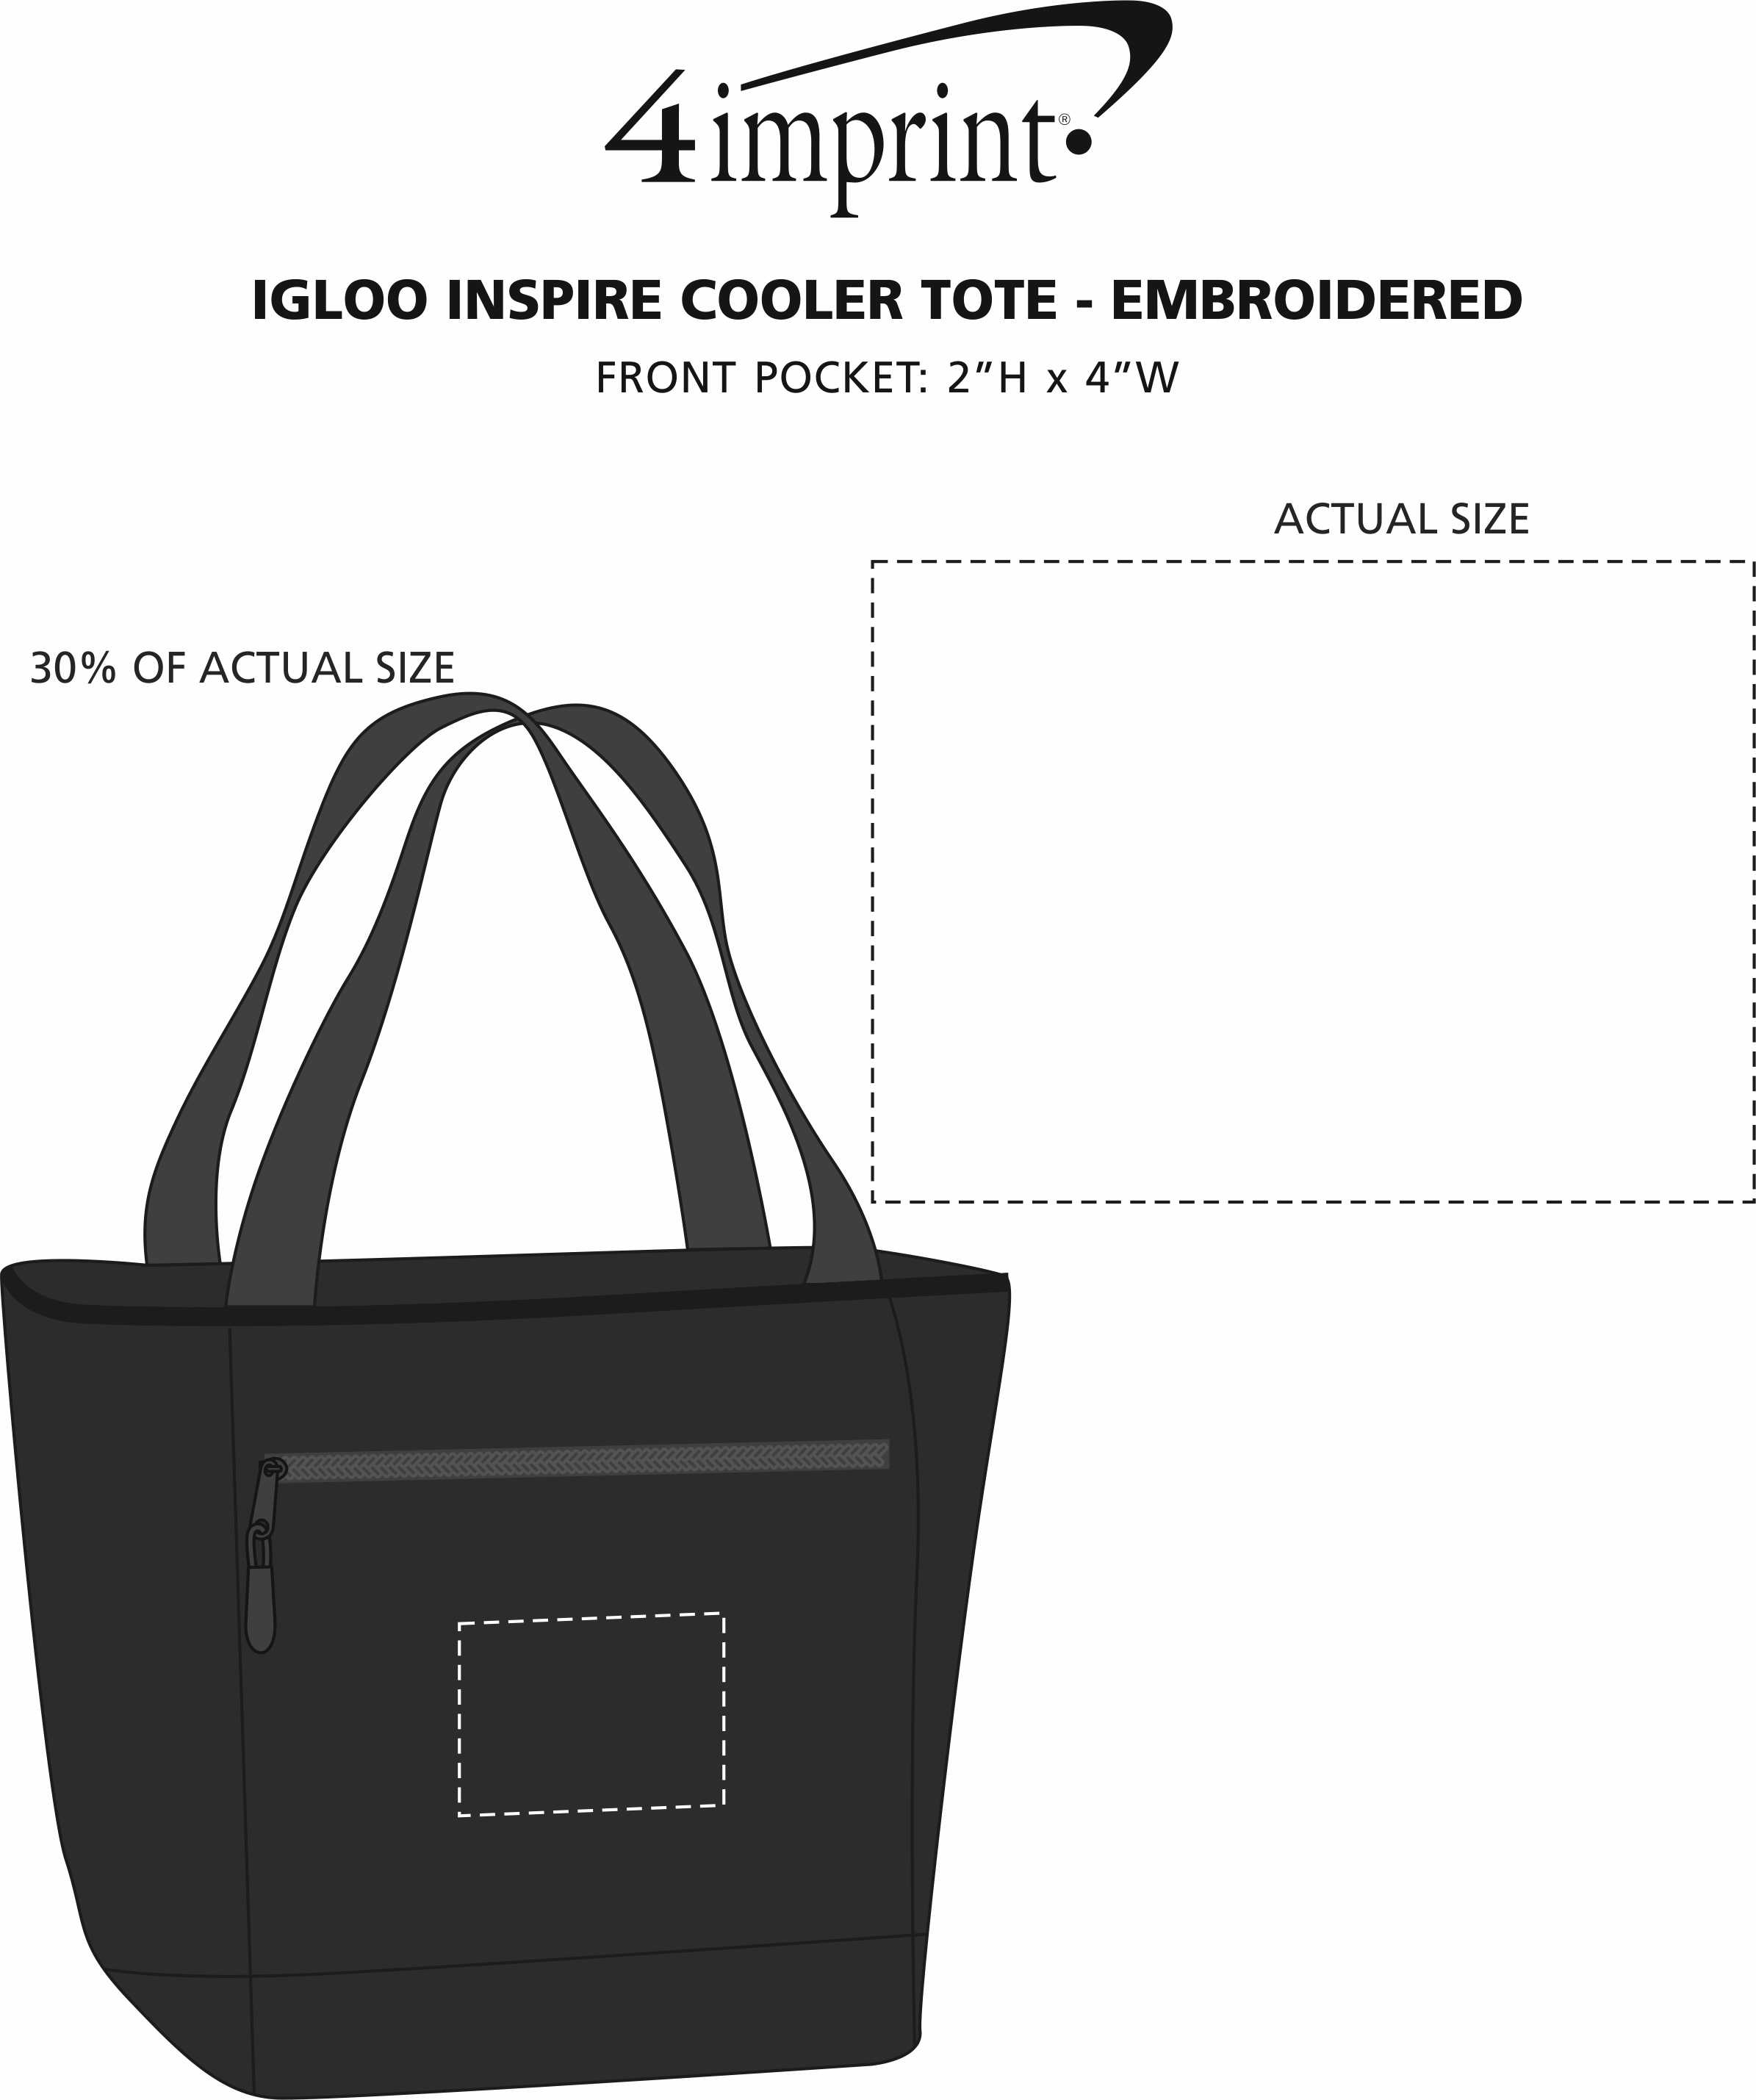 Imprint Area of Igloo Inspire Cooler Tote - Embroidered